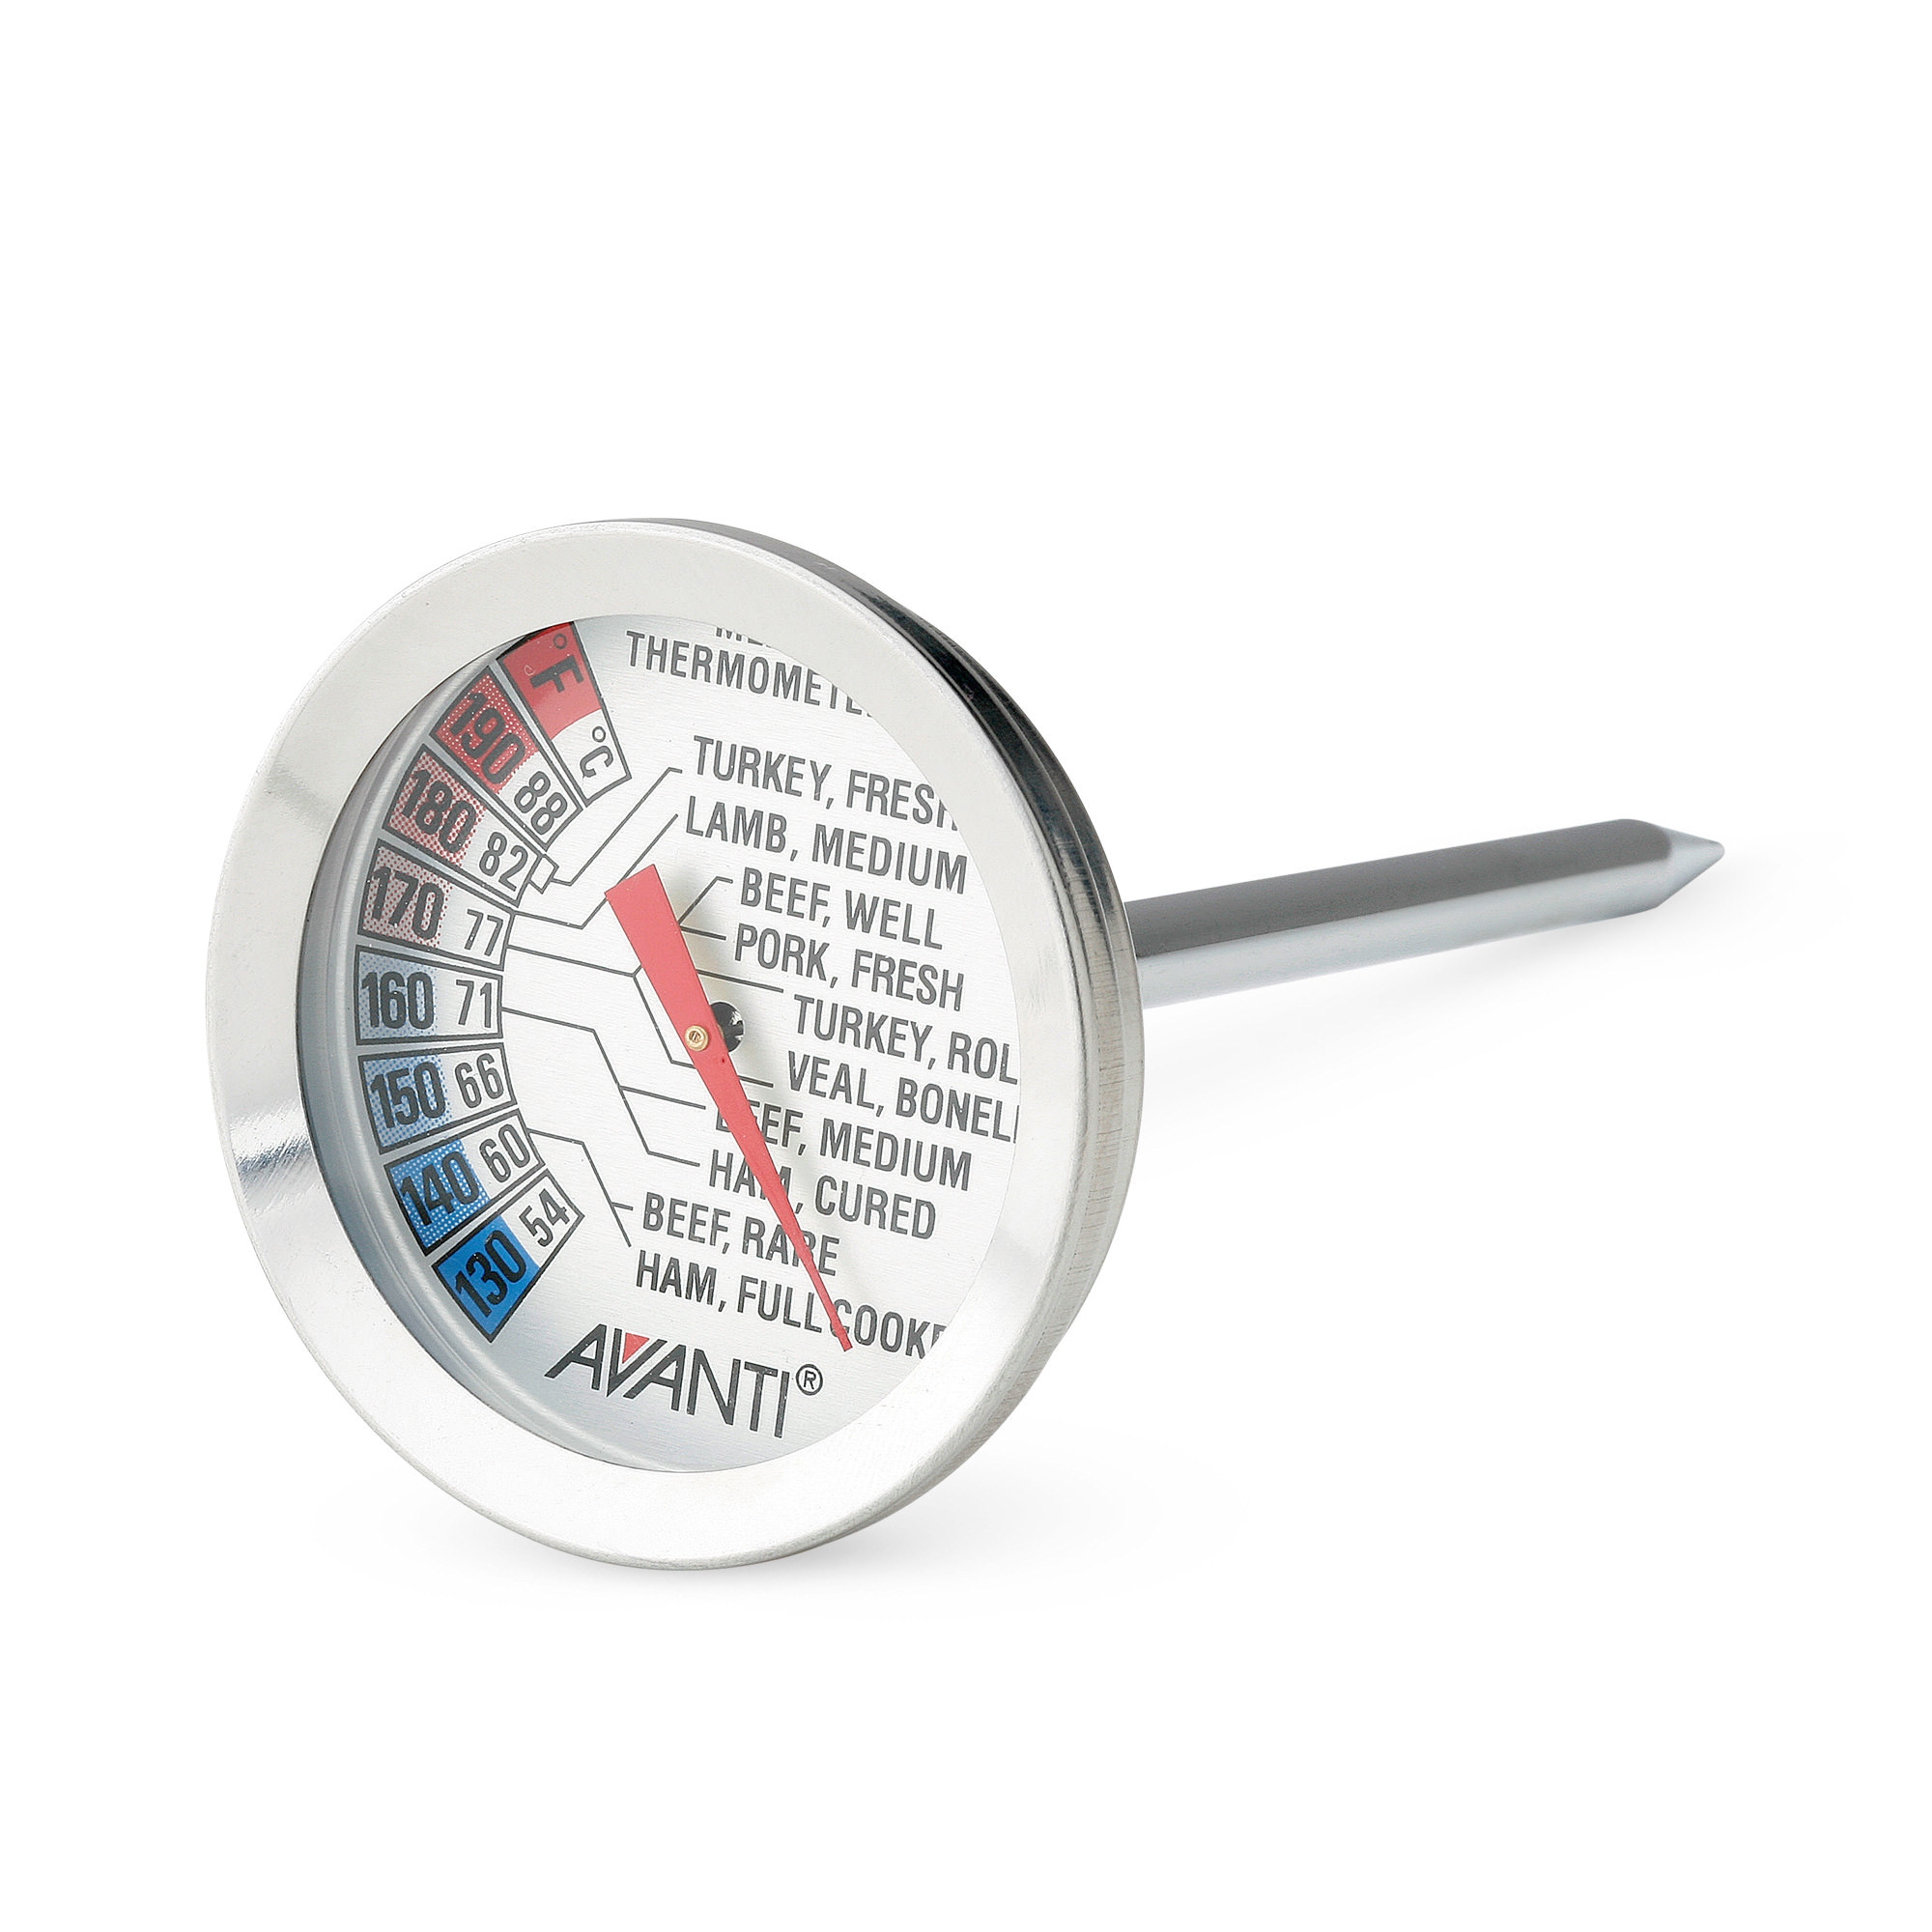 Avanti Chef Meat Thermometer Image 1